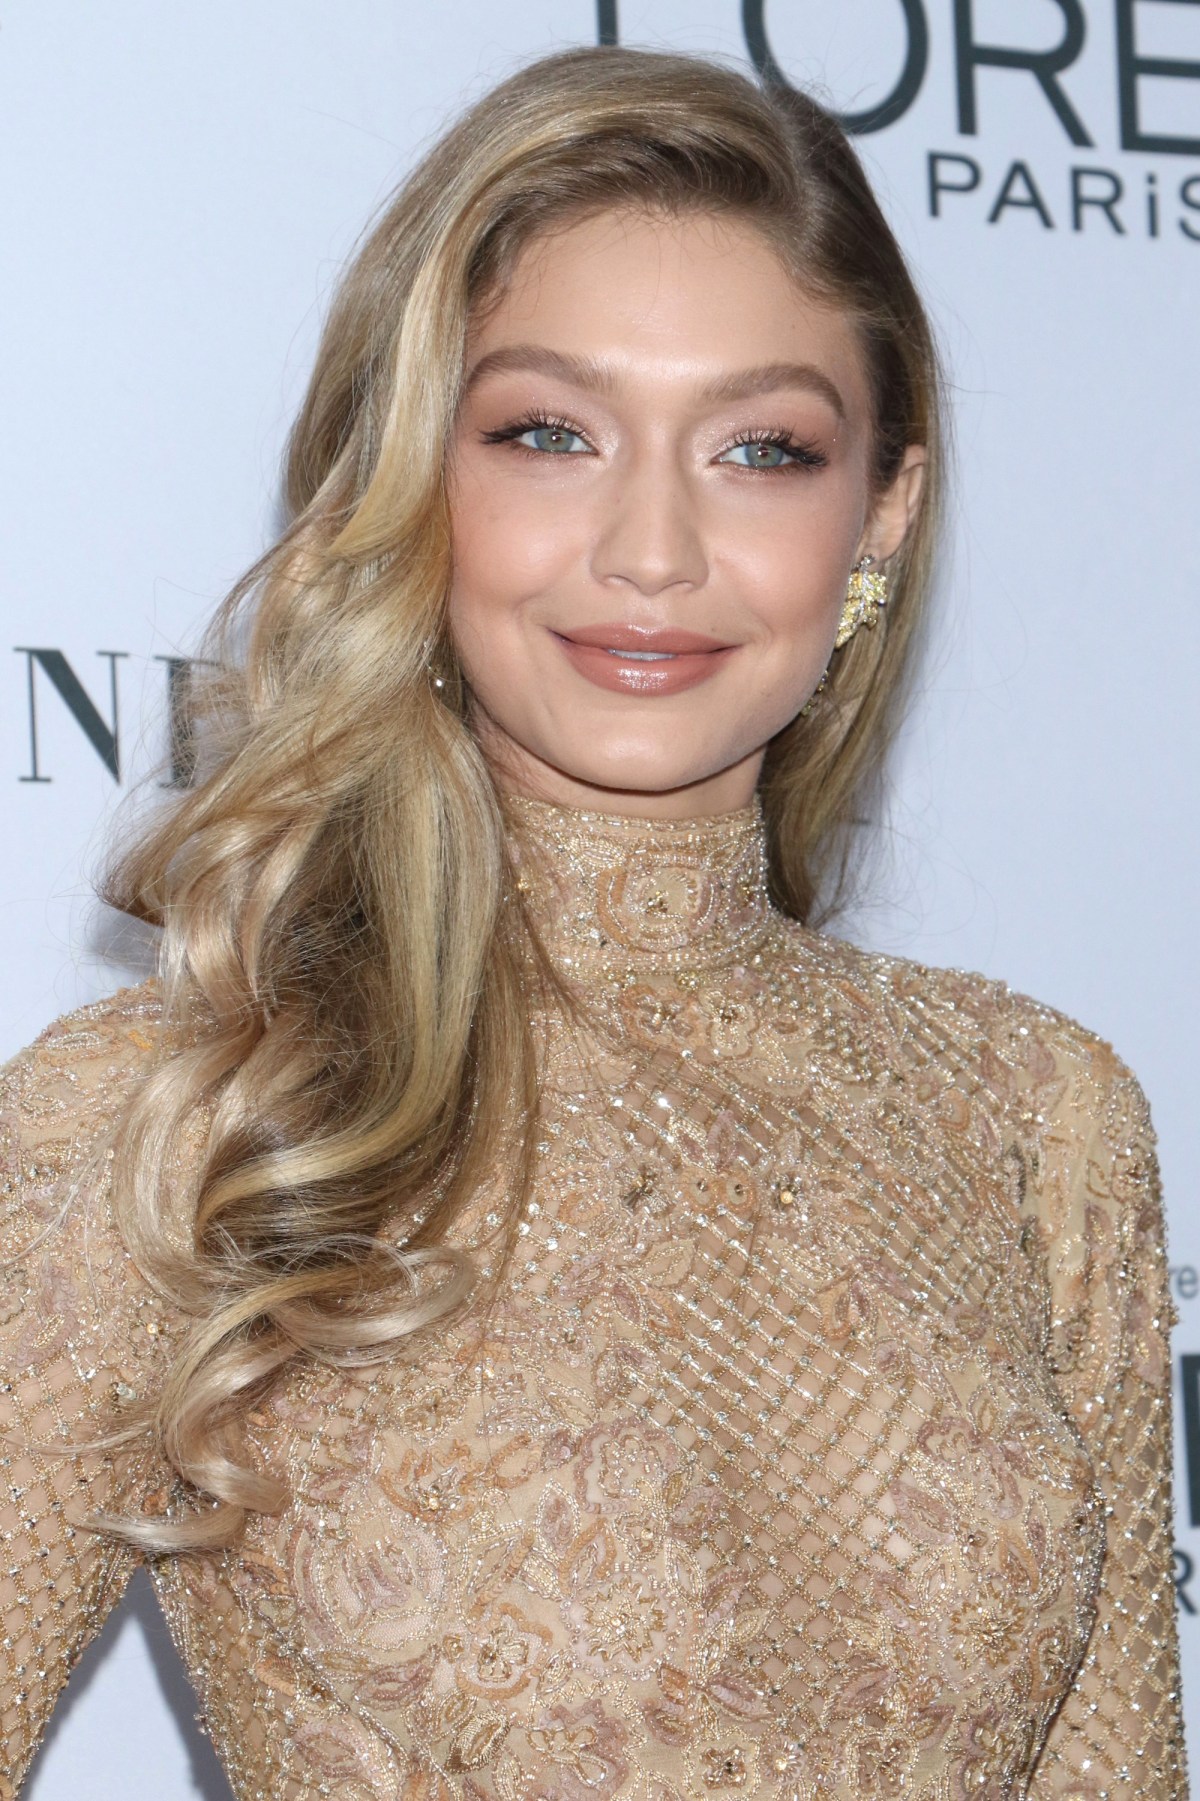 Gigi Hadid Transformation: Photos of the Model Young to Now